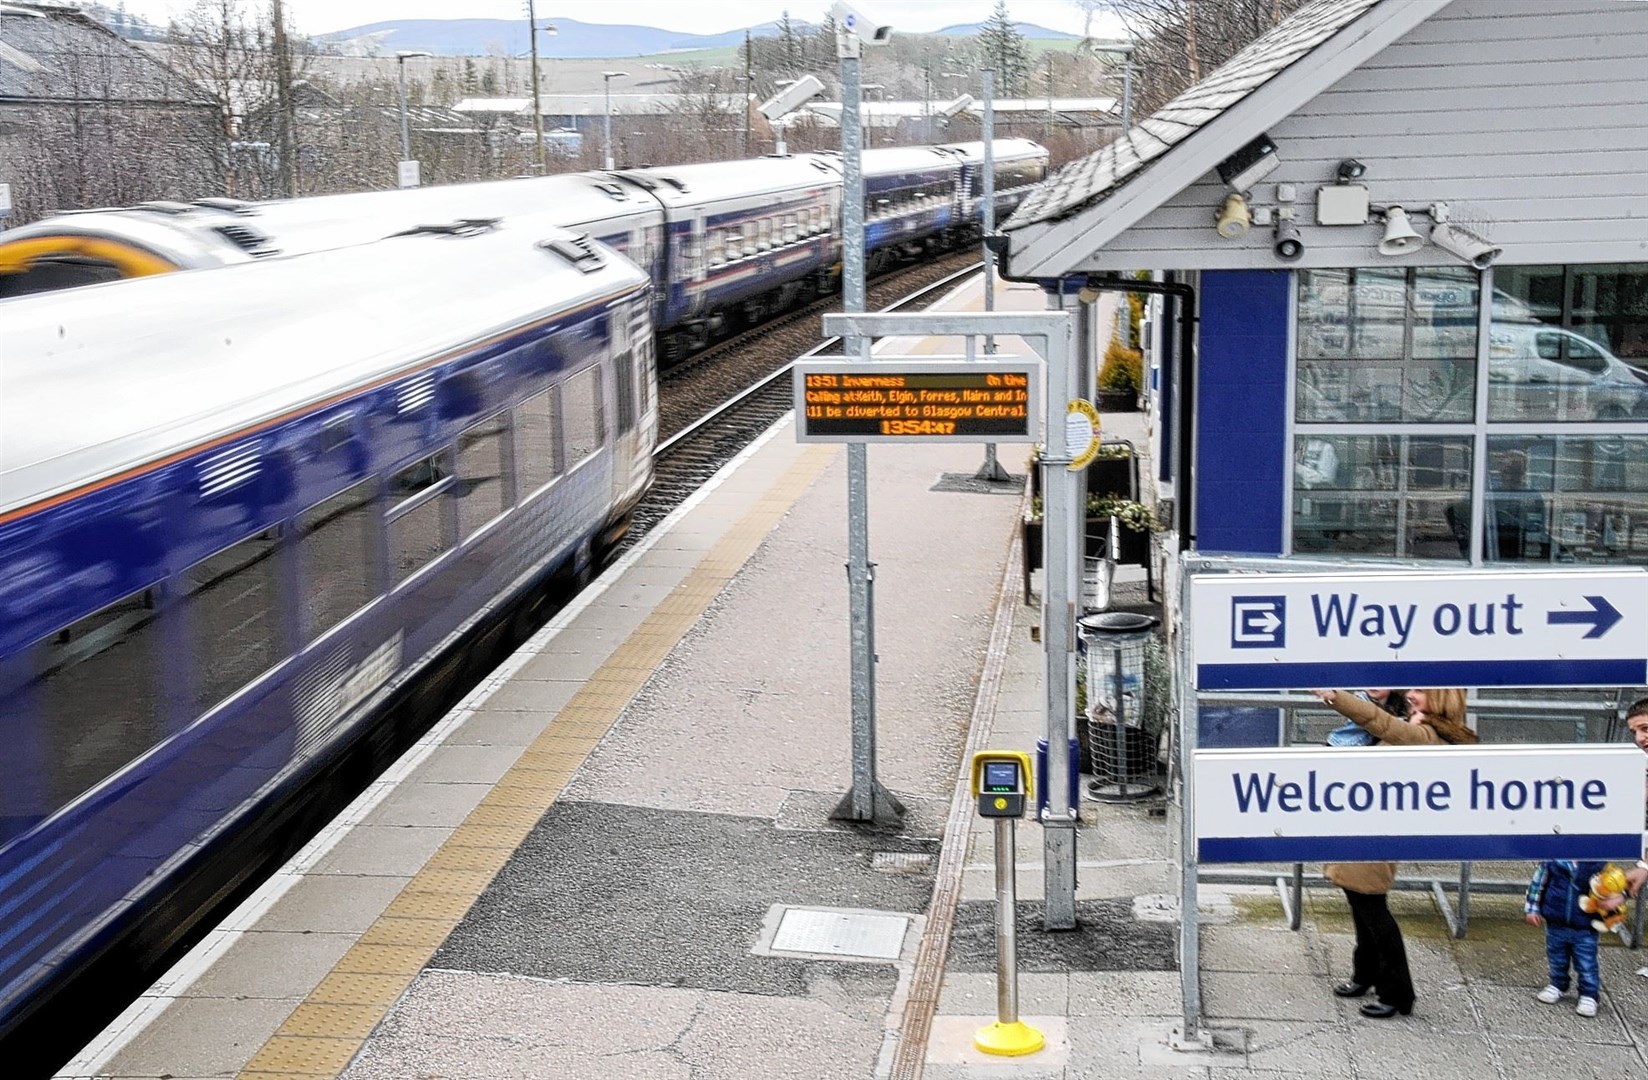 ScotRail trains service Huntly.